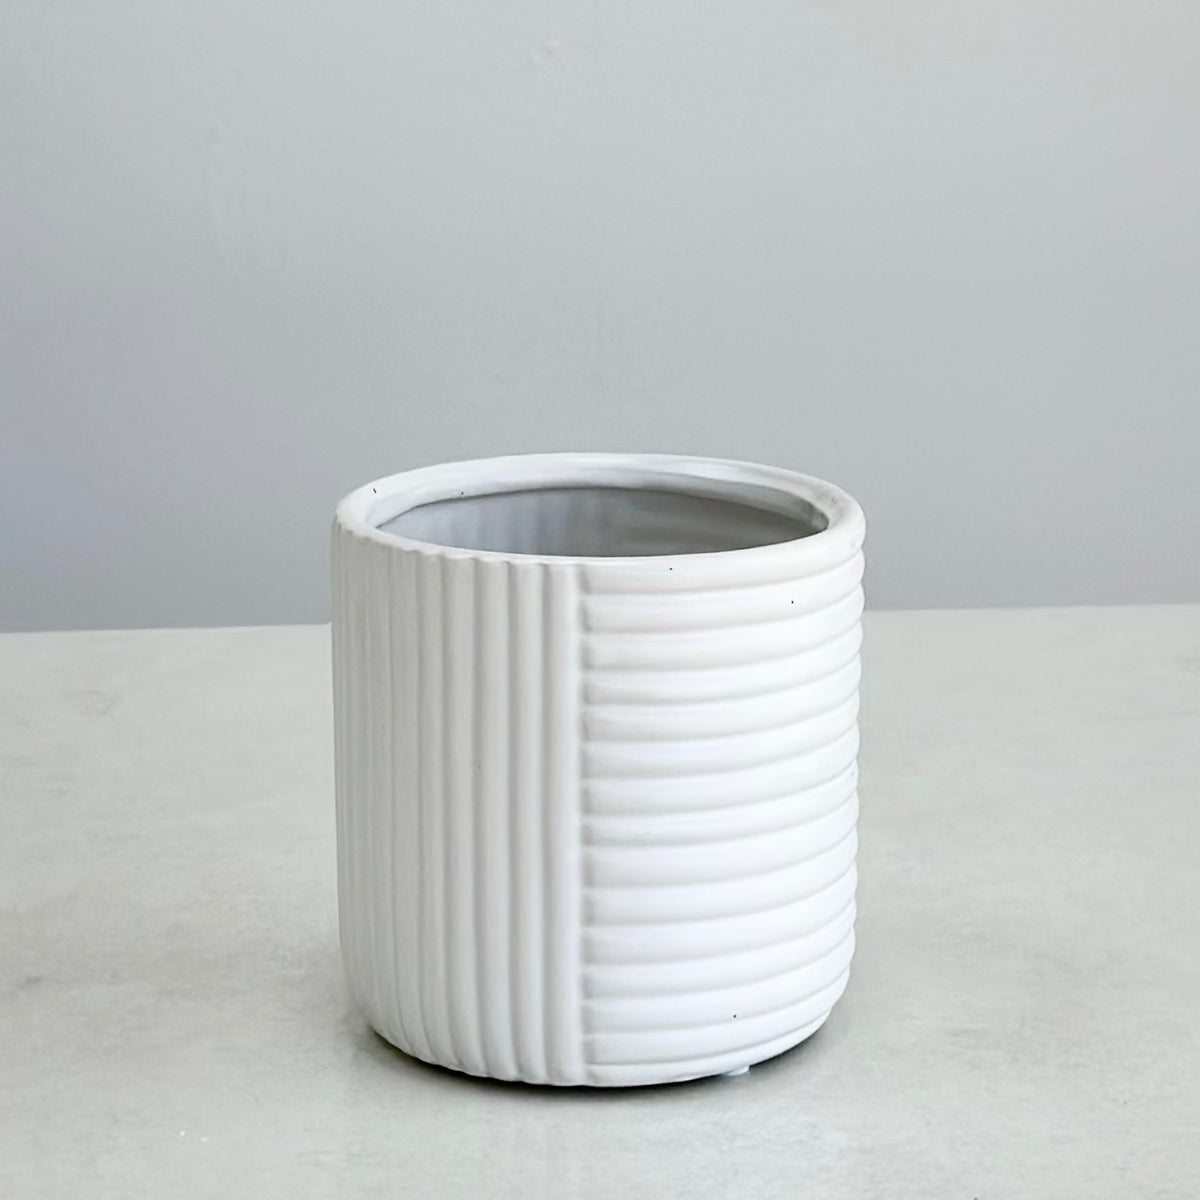 Ceramic White Round Pot With Abstract Lines